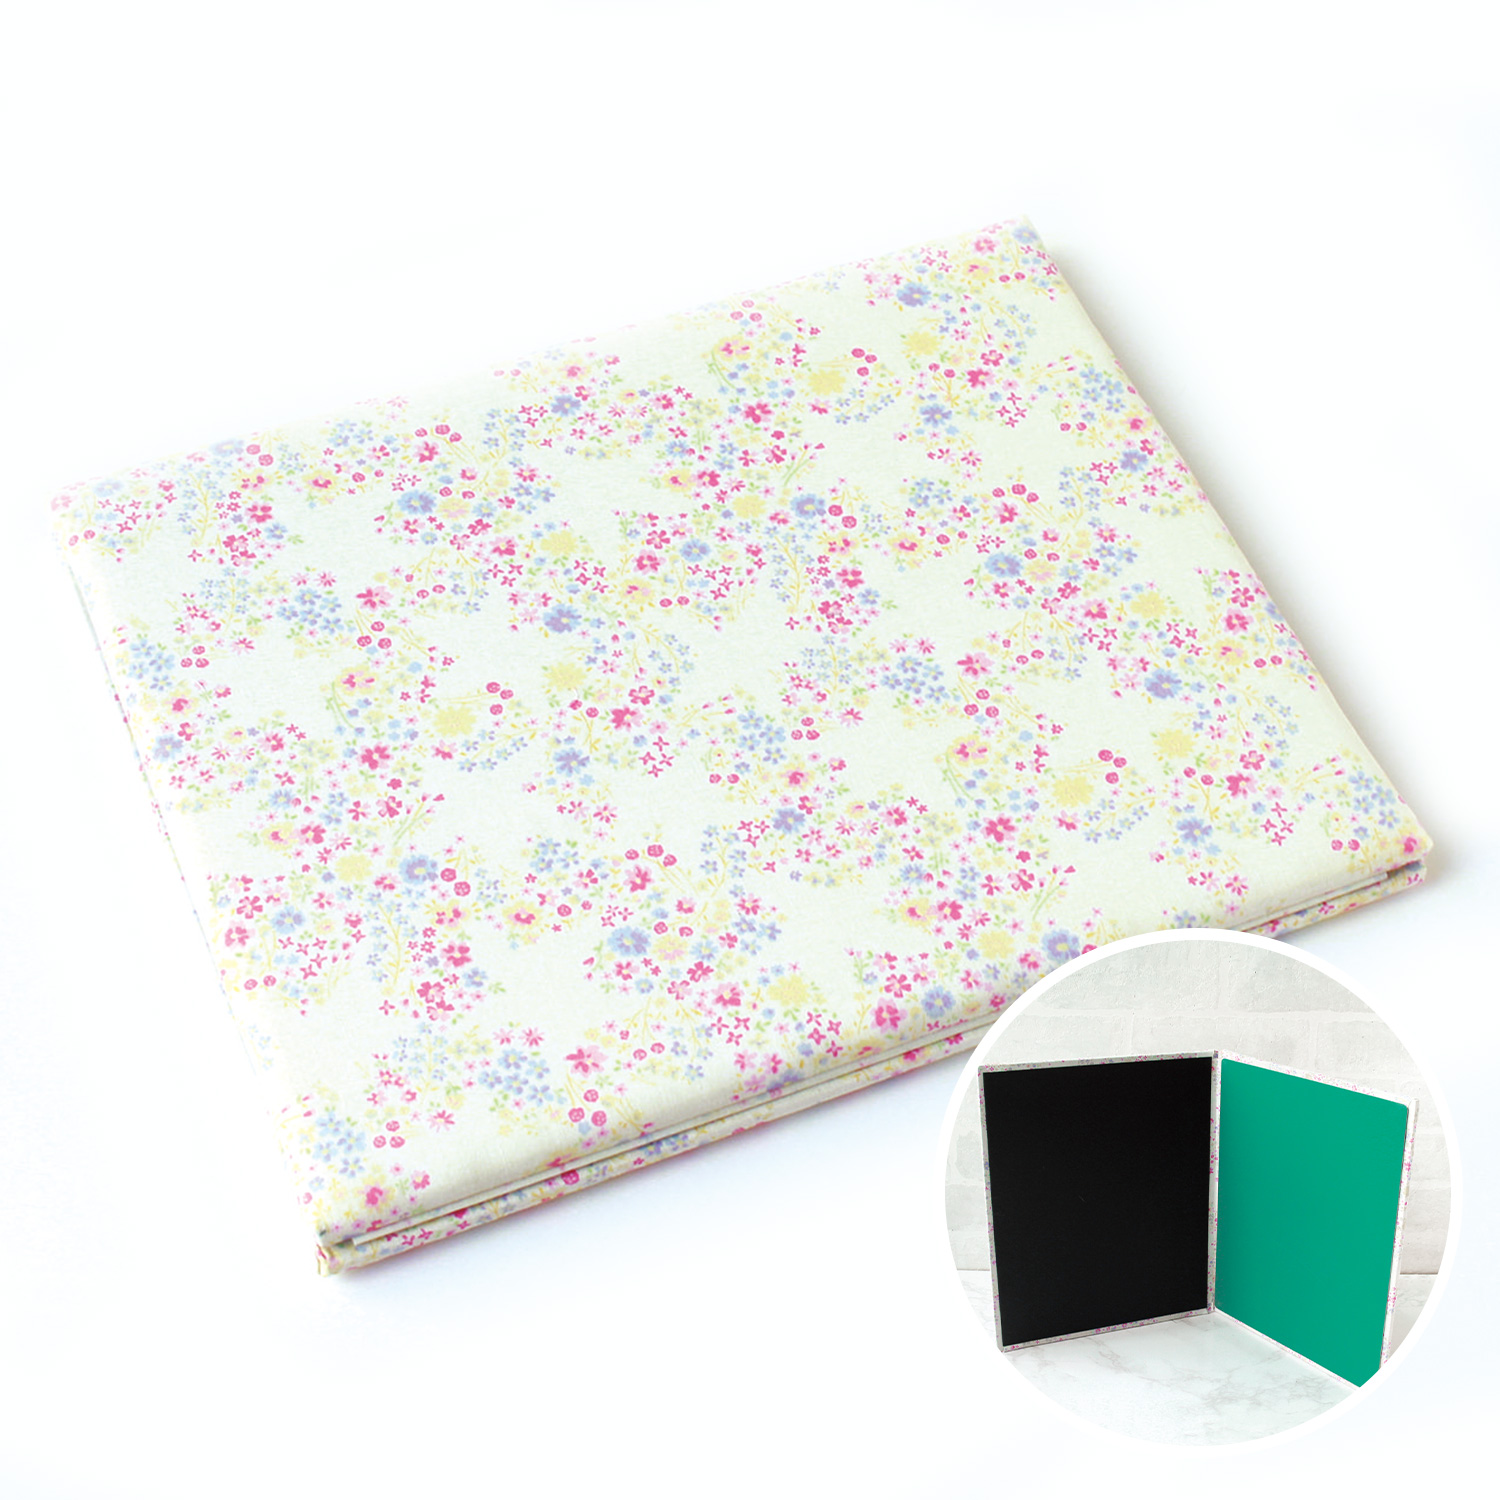 LH460122 Patchwork Board"", Little Board II・Floral Pattern <Cutting Mat + Sandpaper Included> (sheets)